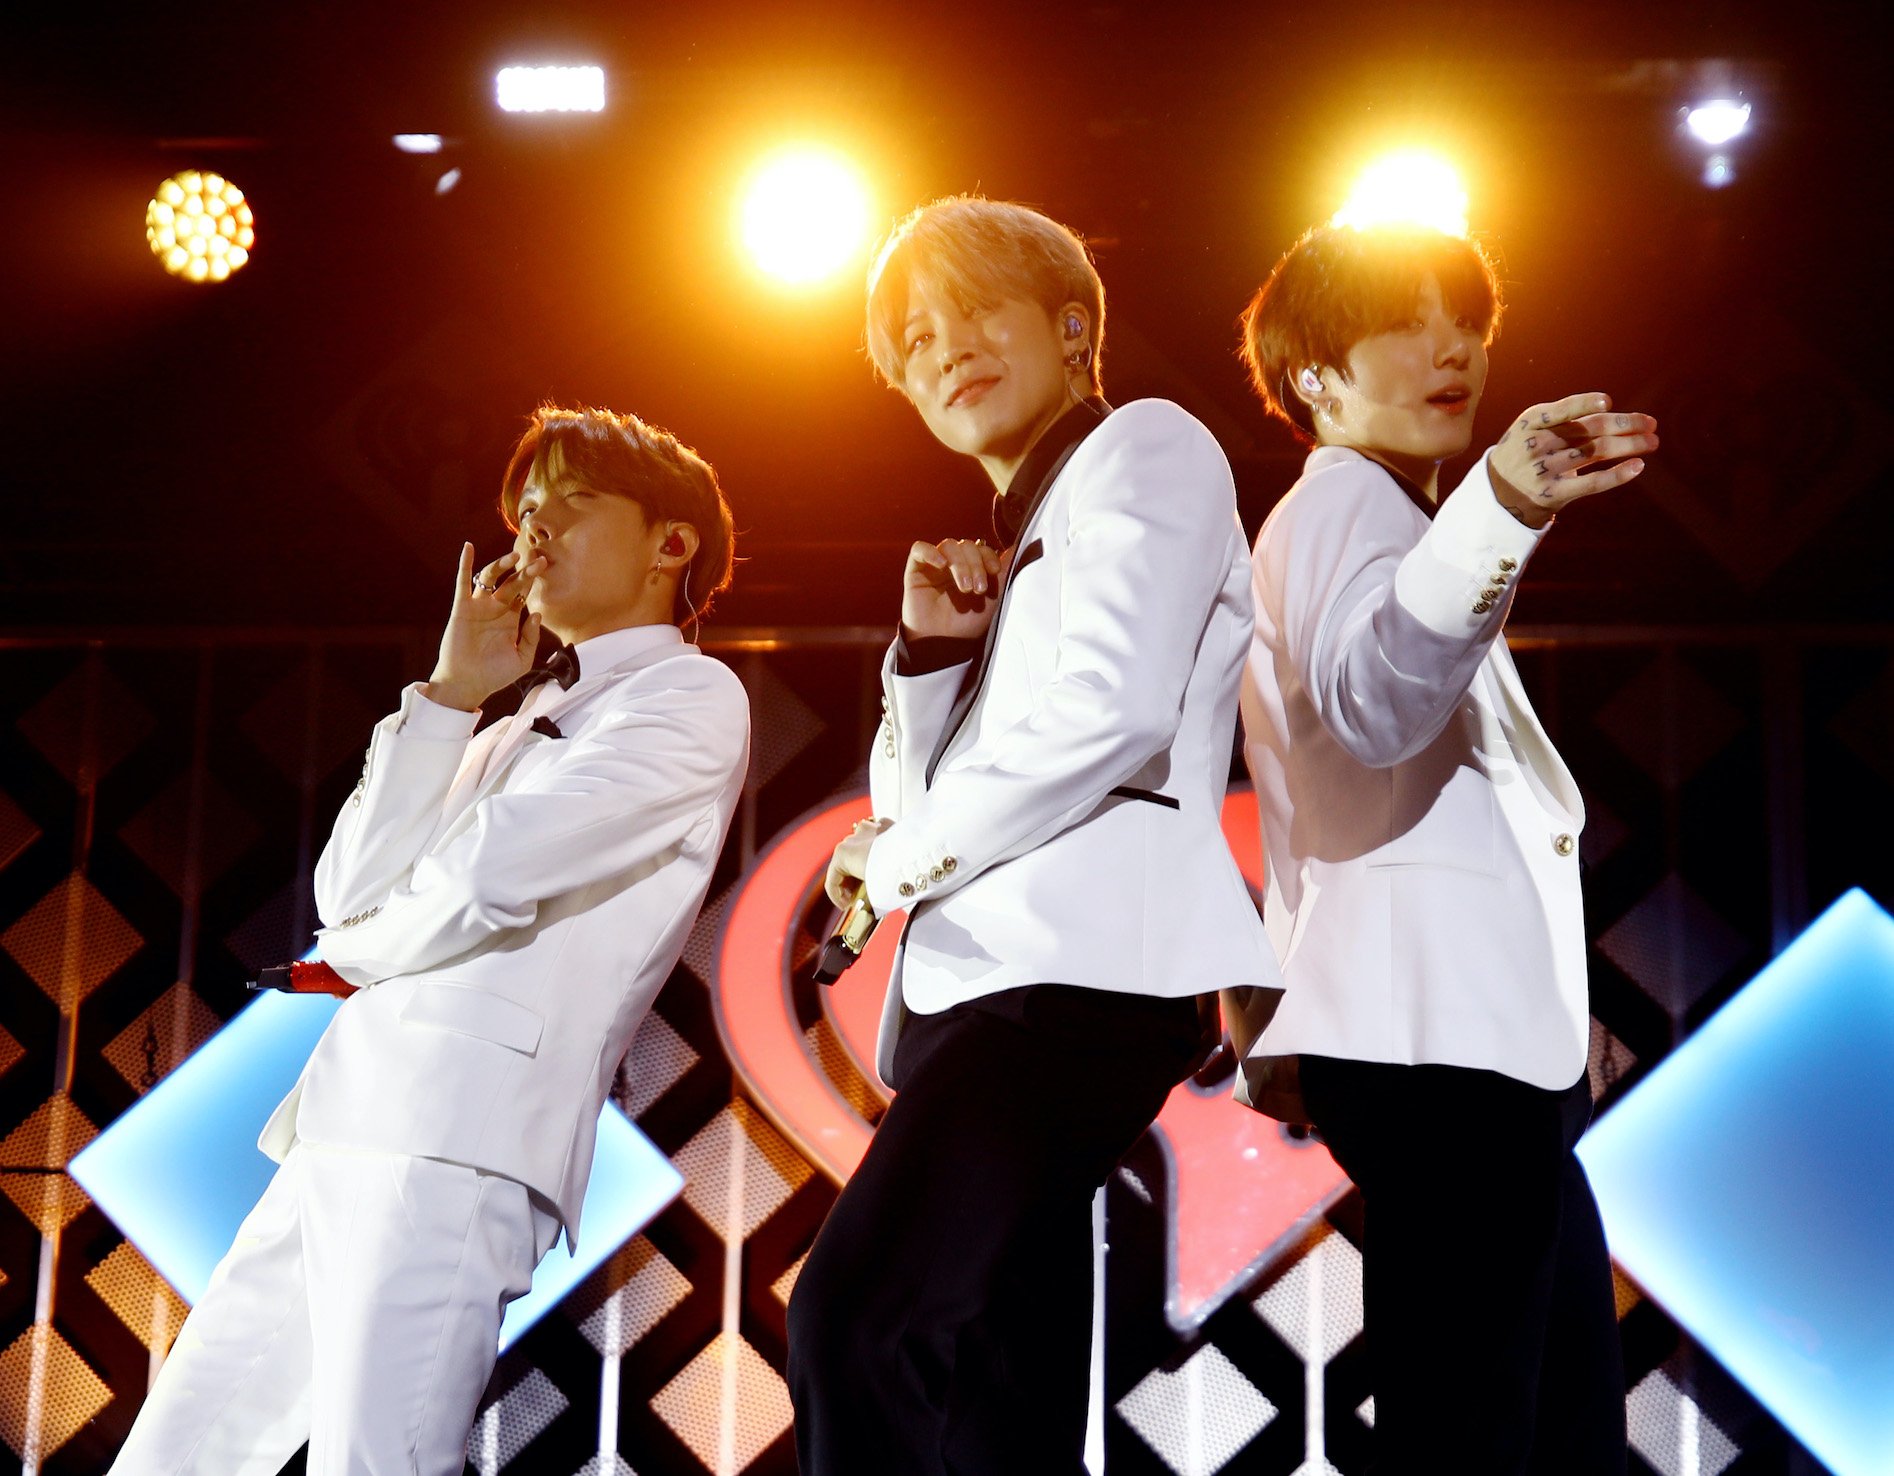 J-Hope, Jimin, and Jungkook of BTS perform onstage during 102.7 KIIS FM's Jingle Ball 2019 